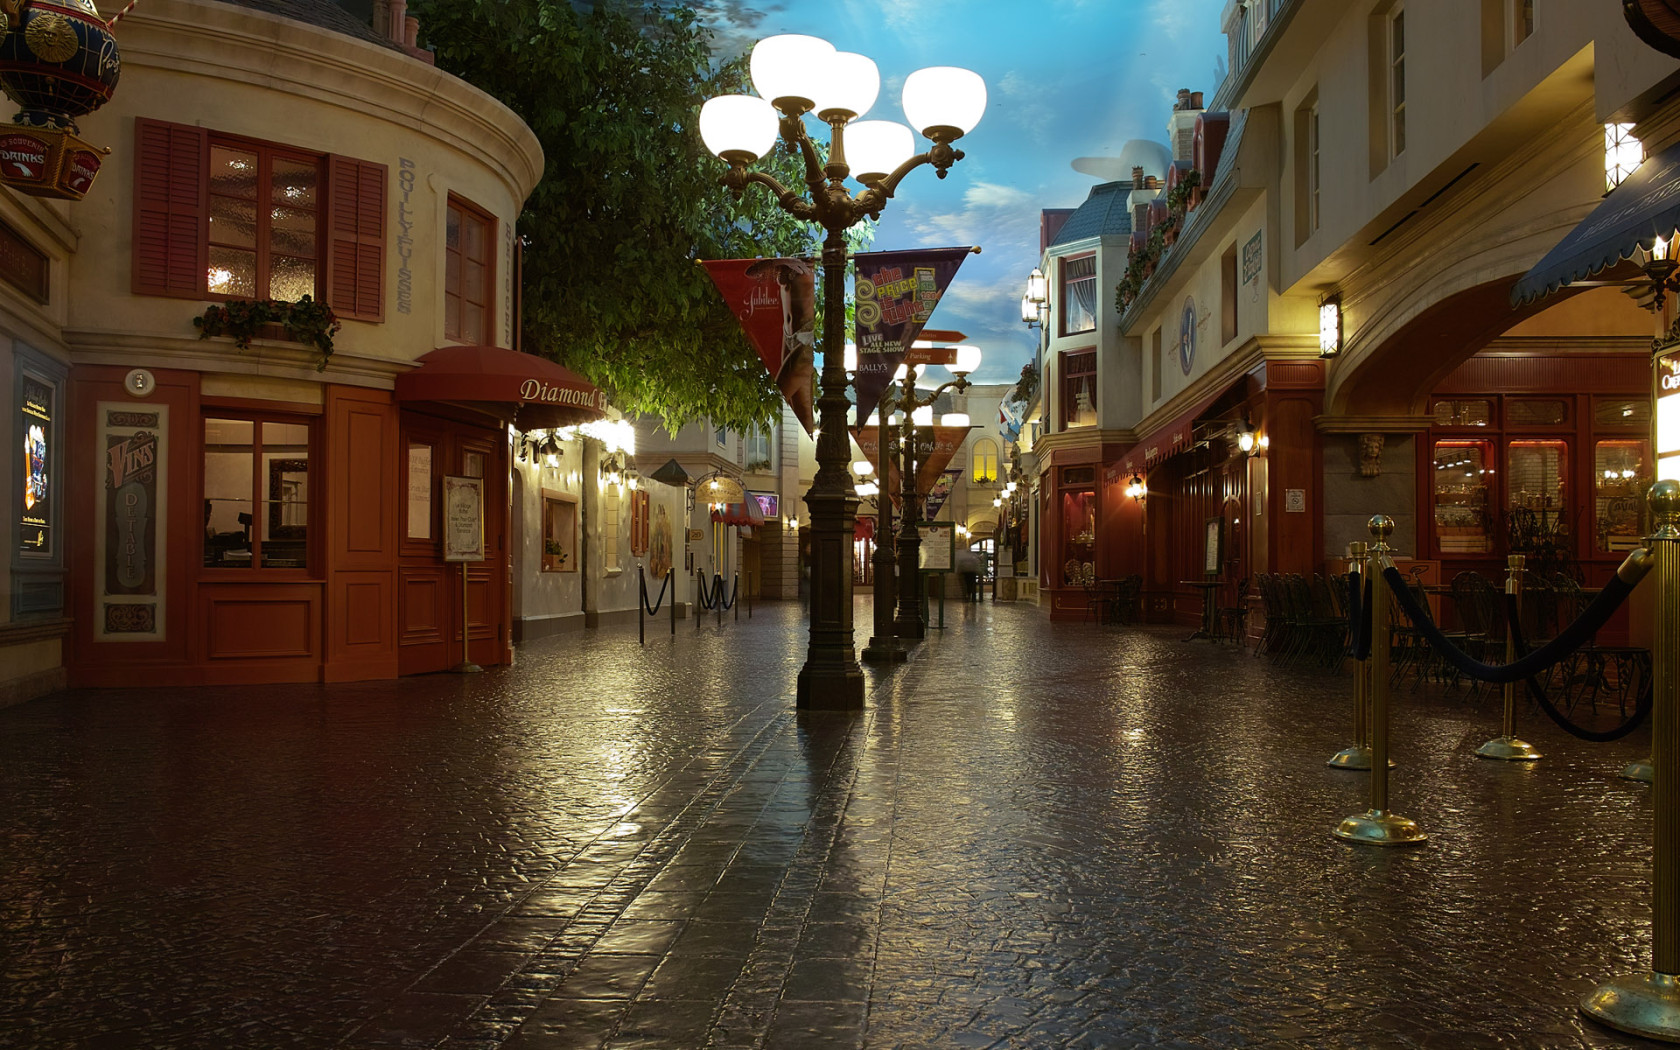 The beautiful old city street